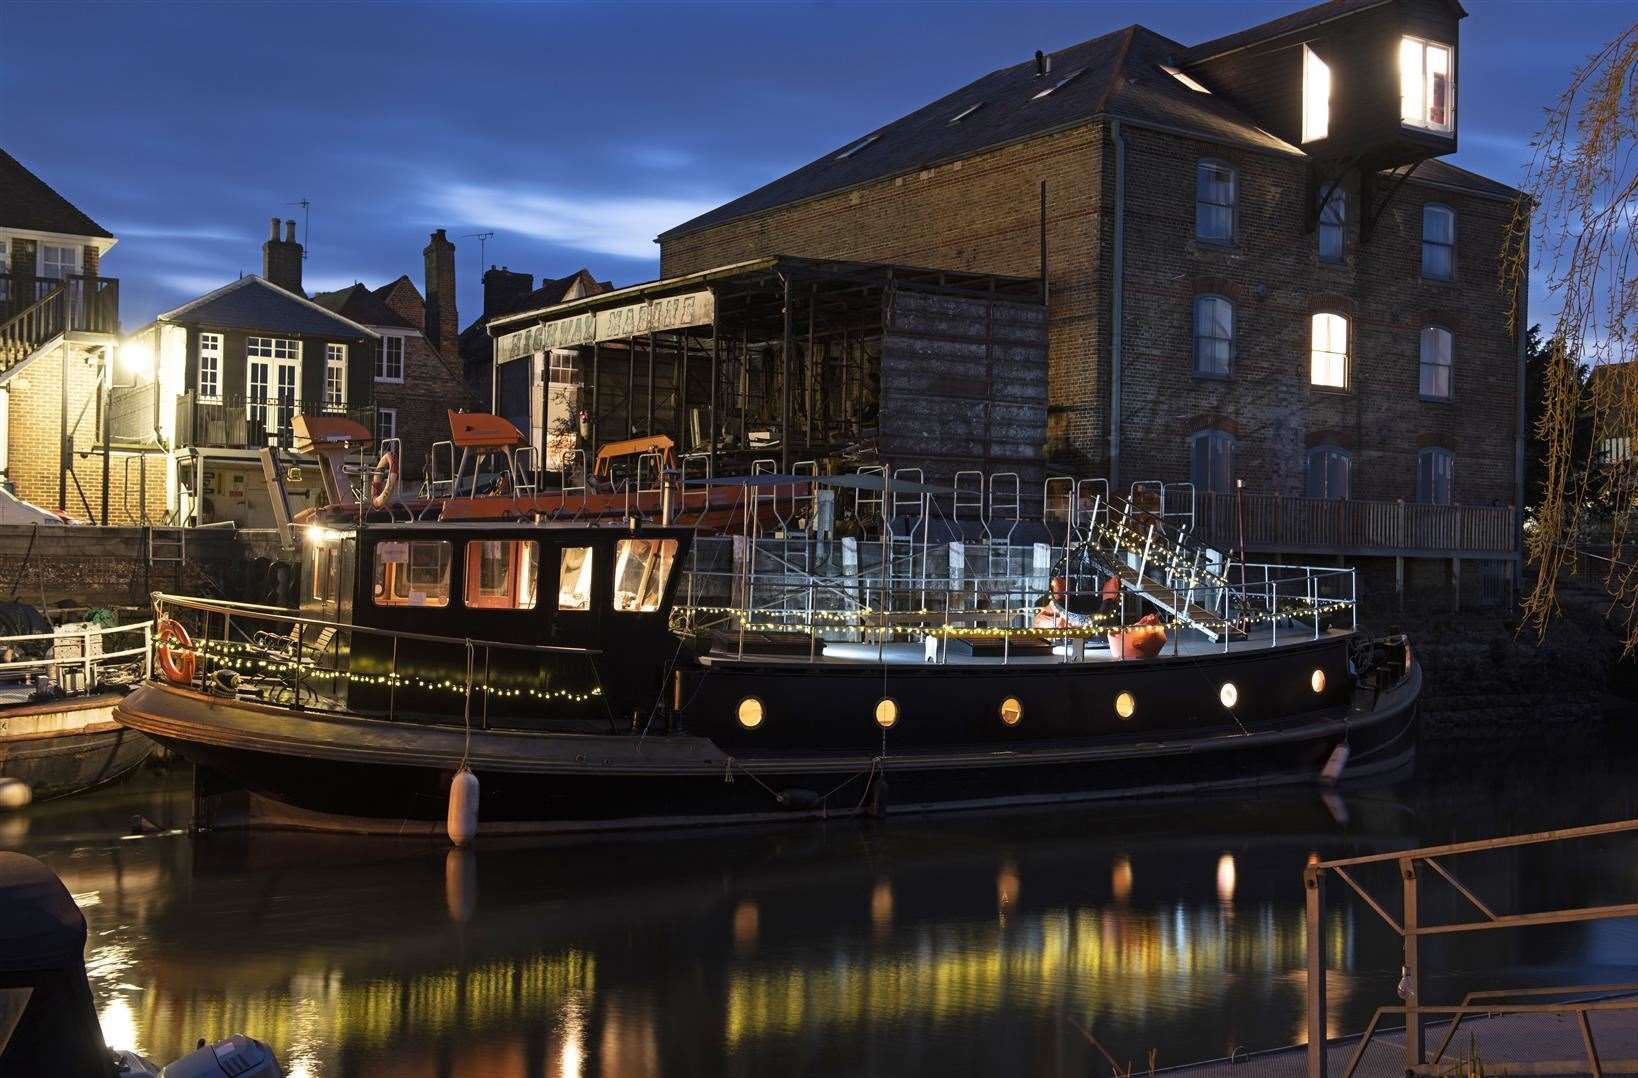 Do you want to sail away? This houseboat could be yours Picture: Miles & Barr